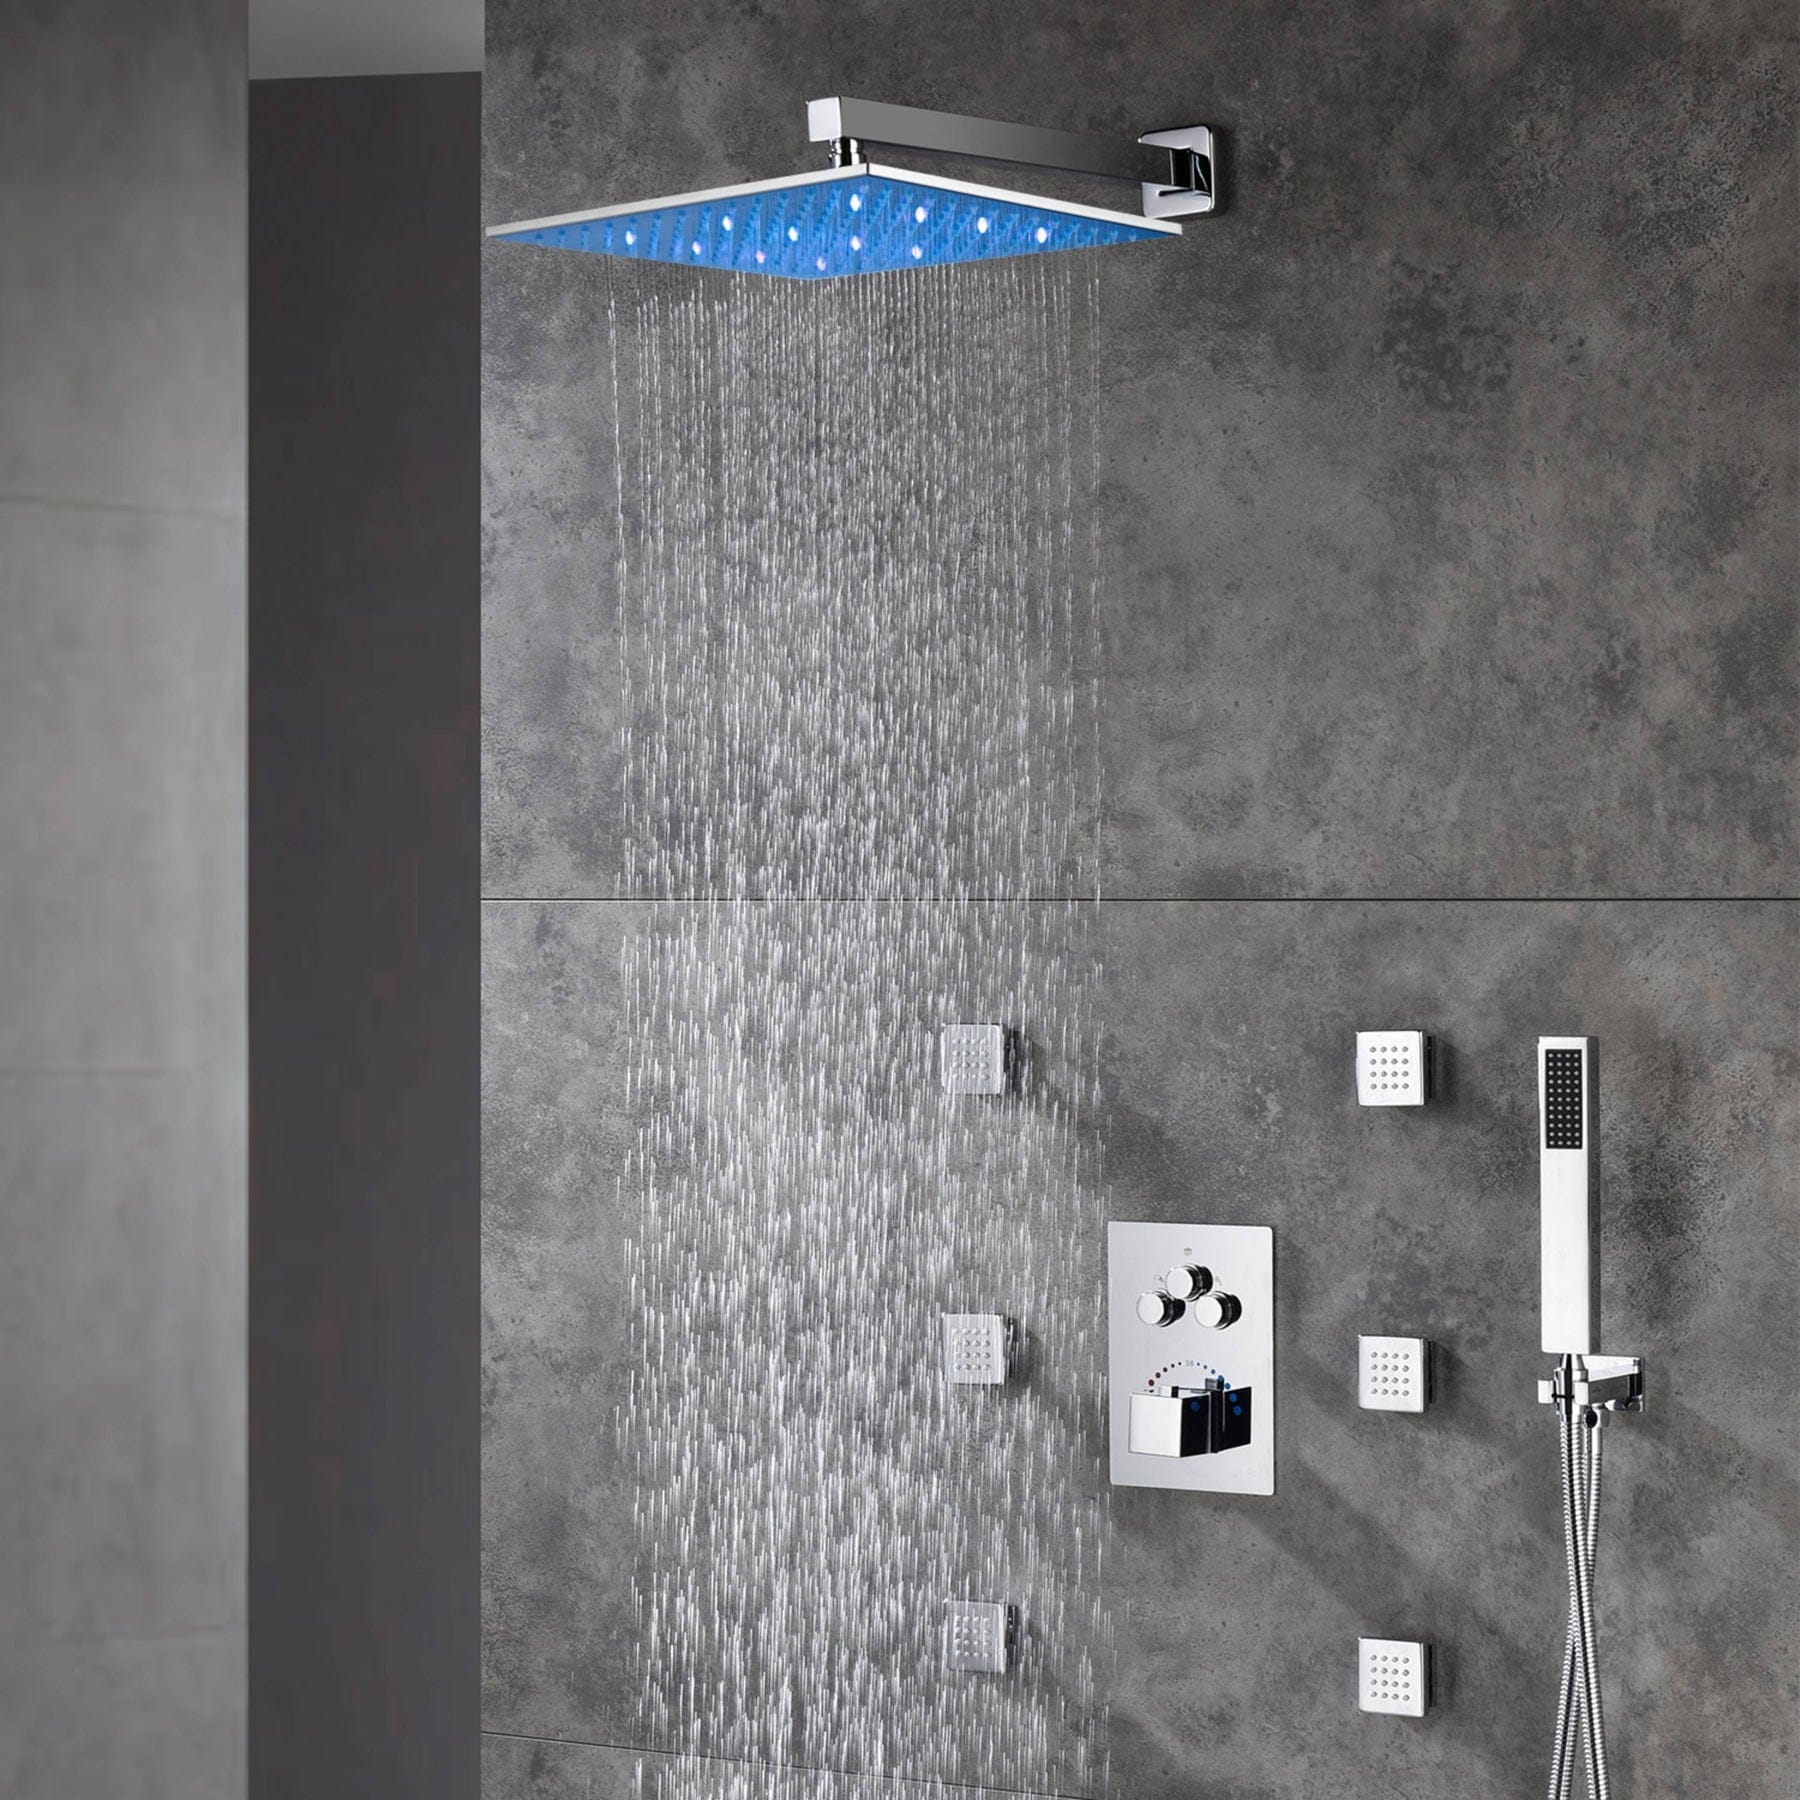 https://ak1.ostkcdn.com/images/products/is/images/direct/58a6f332472f6e71a5f206a9b589075049fb9903/12%22-LED-Wall-Rainfall-Shower-3-Way-Thermostatic-Faucet-System-w--6-Body-Jets.jpg